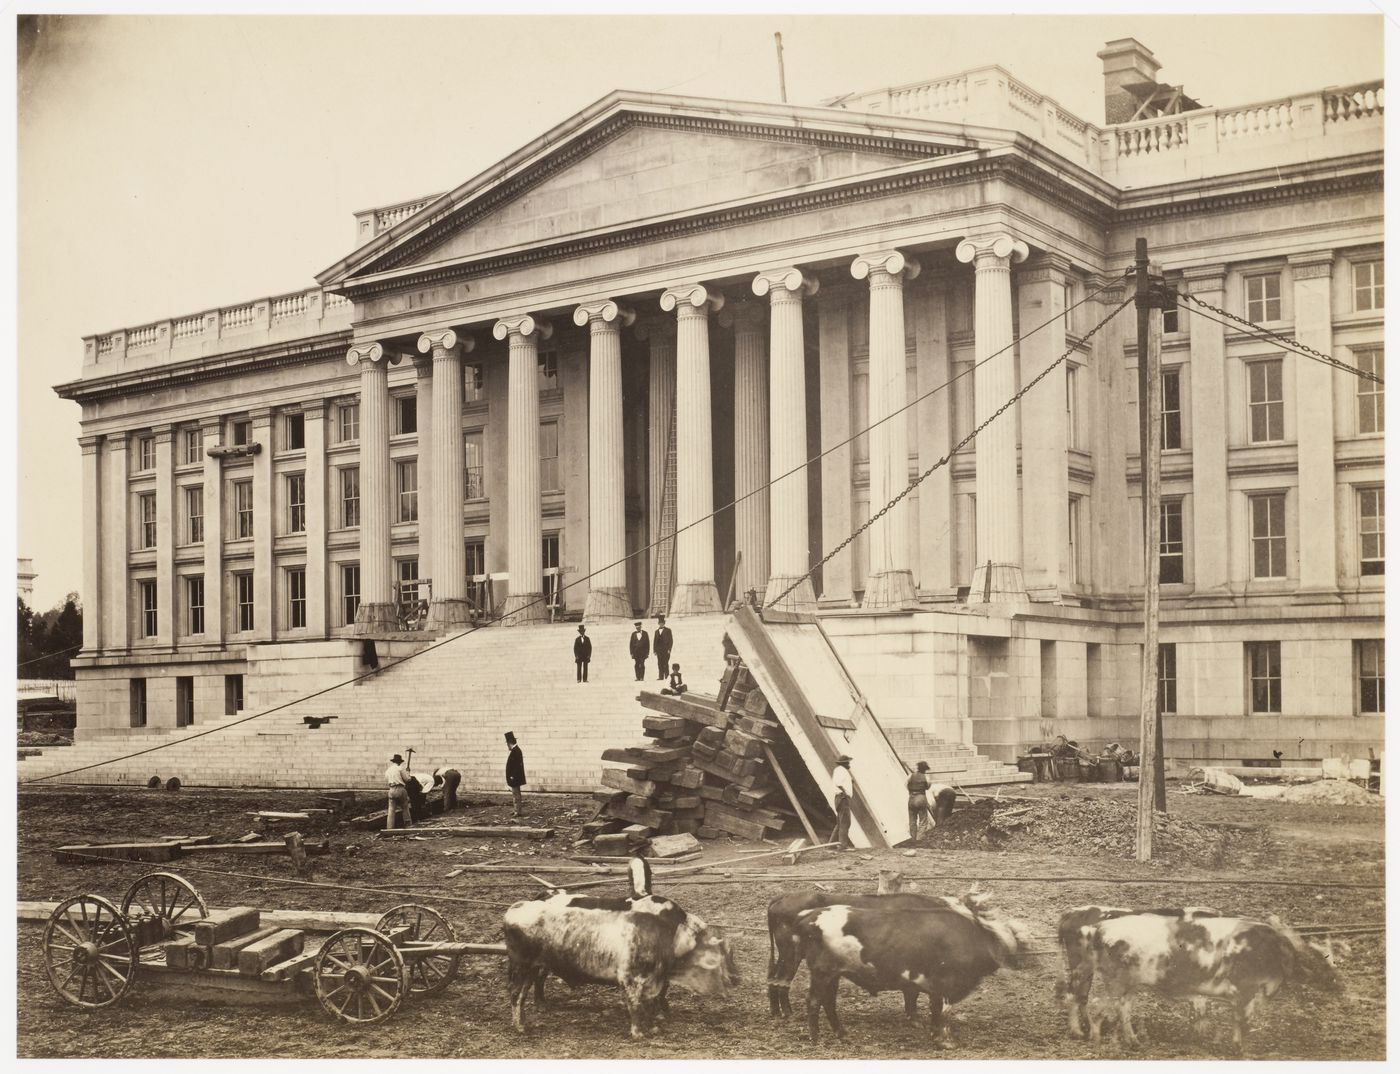 Treasury Building under contruction: Term of oxen pulling cart, team of men hoisting wooden platform, figures watching from steps, Washington, District of Columbia